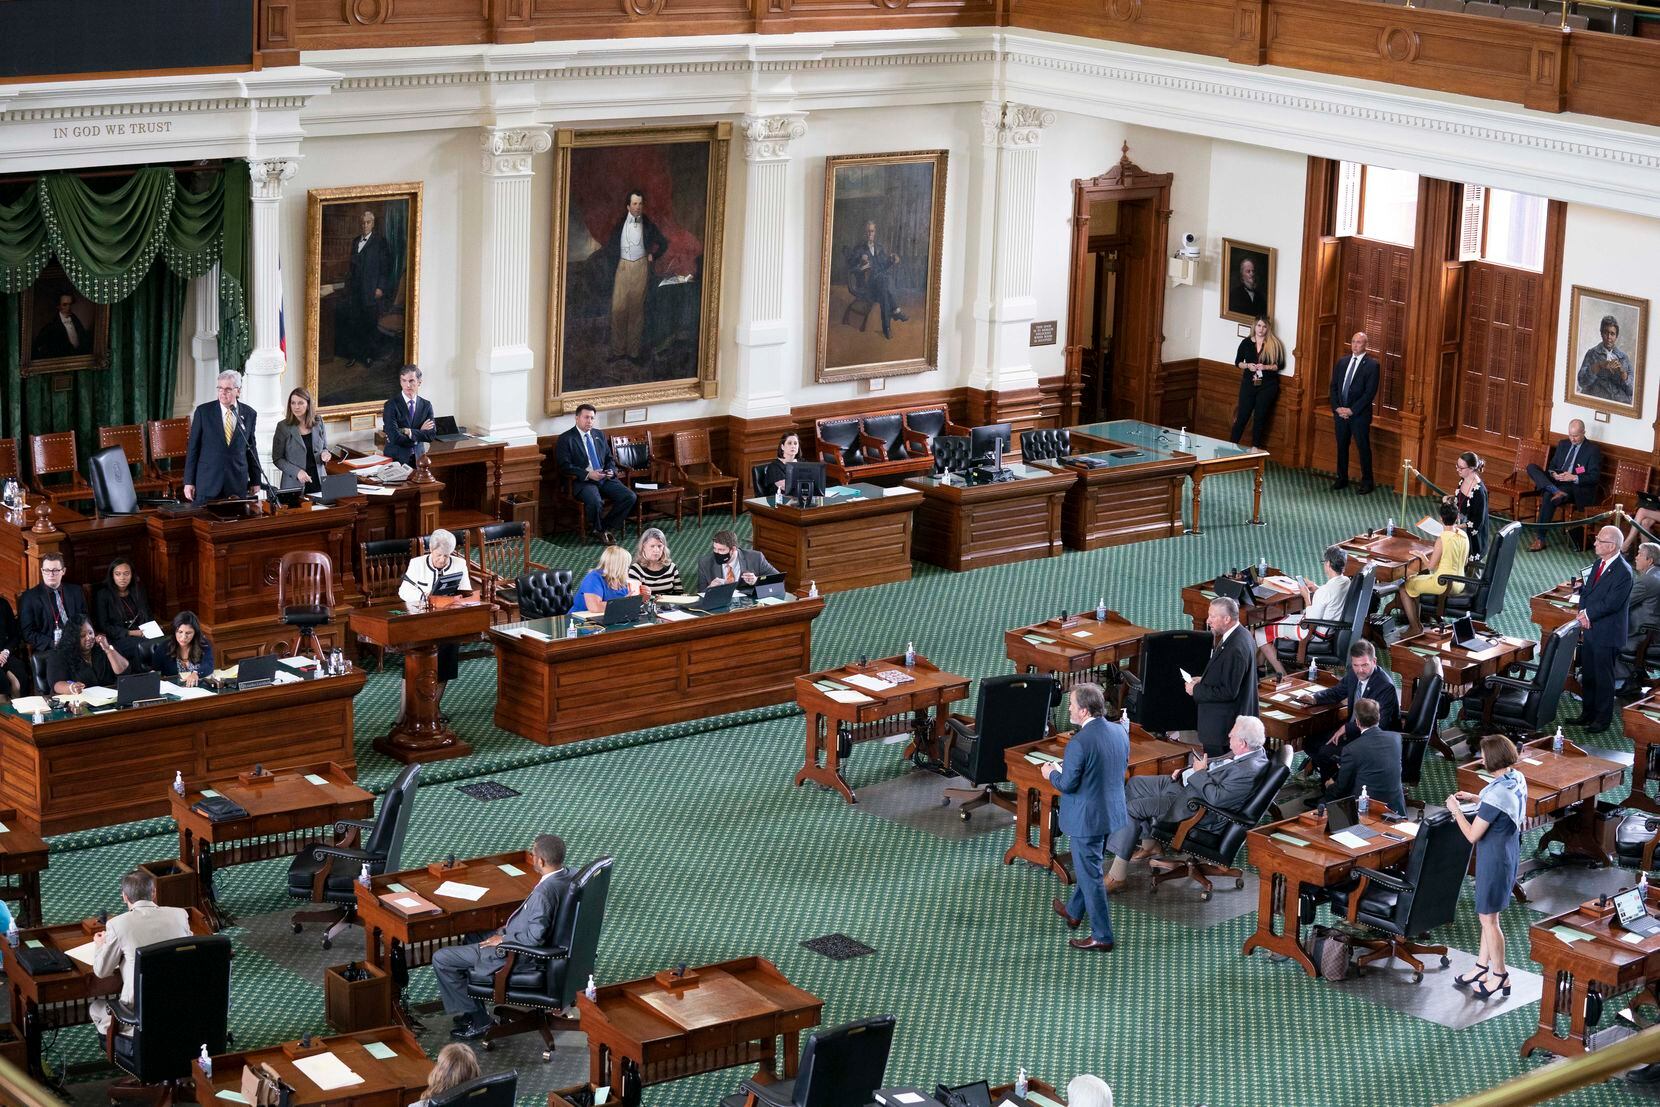 The Texas Senate met for about 90 minutes on Thursday, opening day of the special session. On each of the next four days, Senate panels will be considering bills.